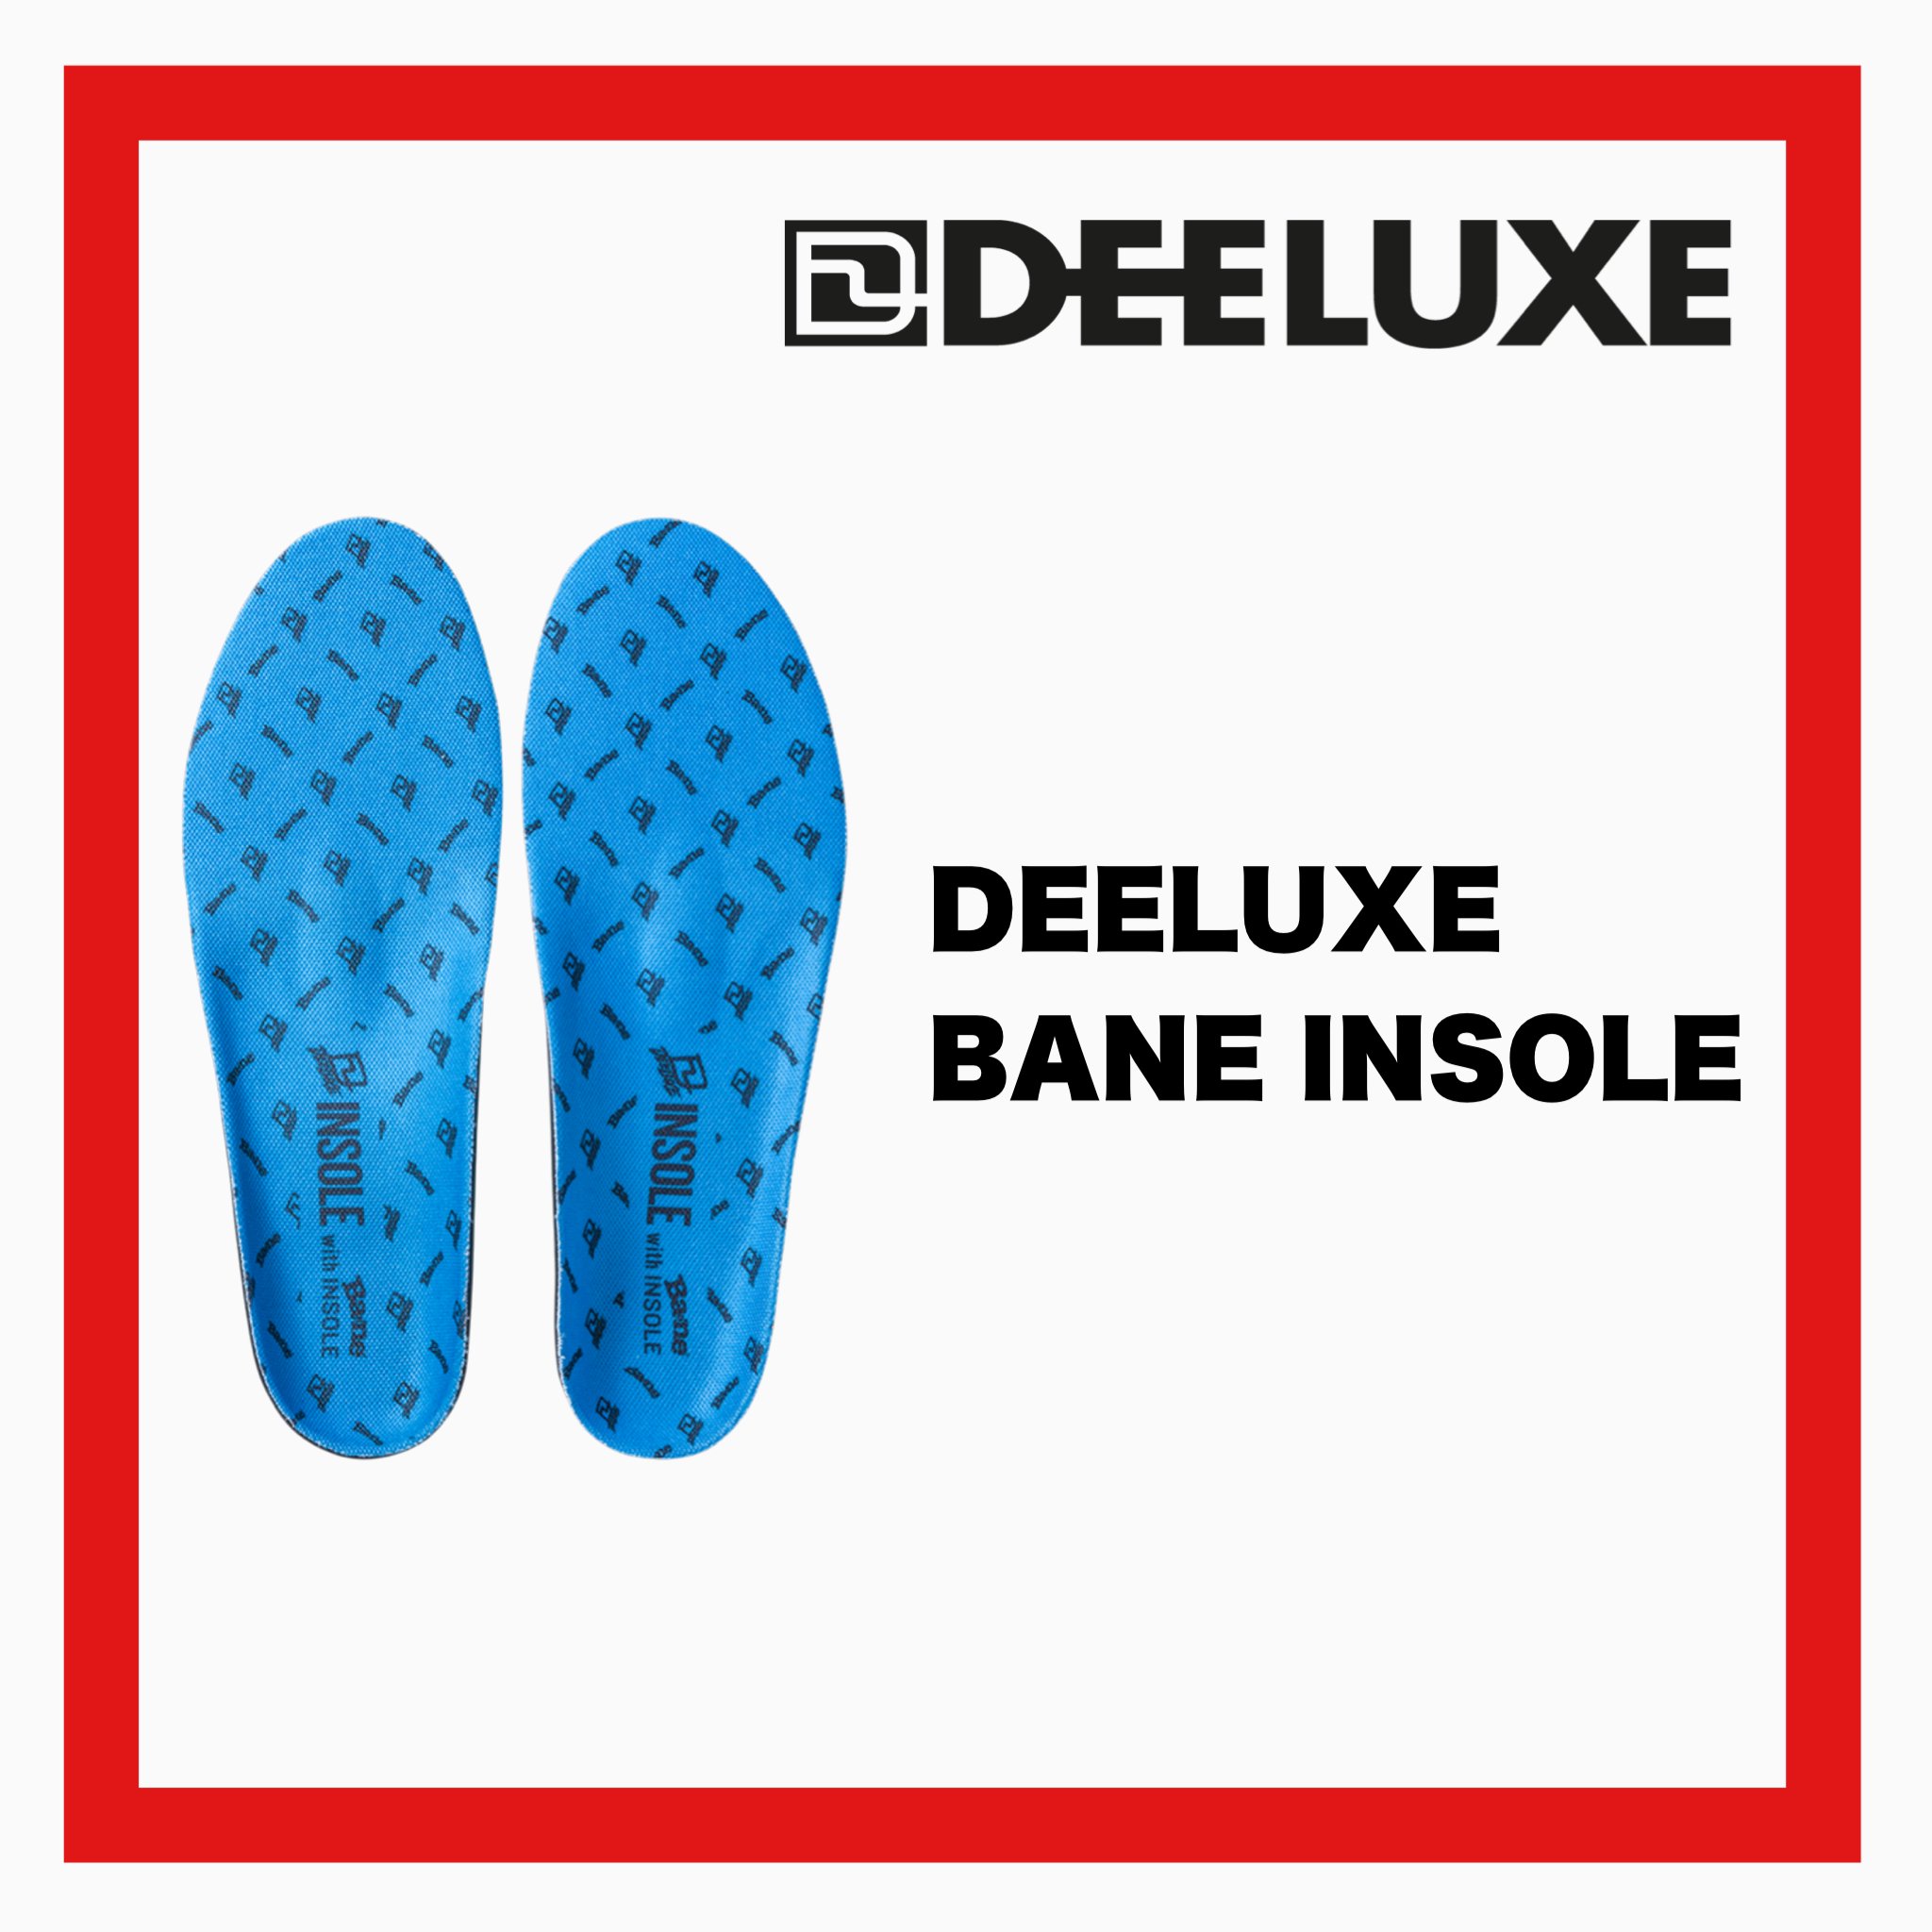 DEELUXE BANE INSOLE - JOINT HOUSE